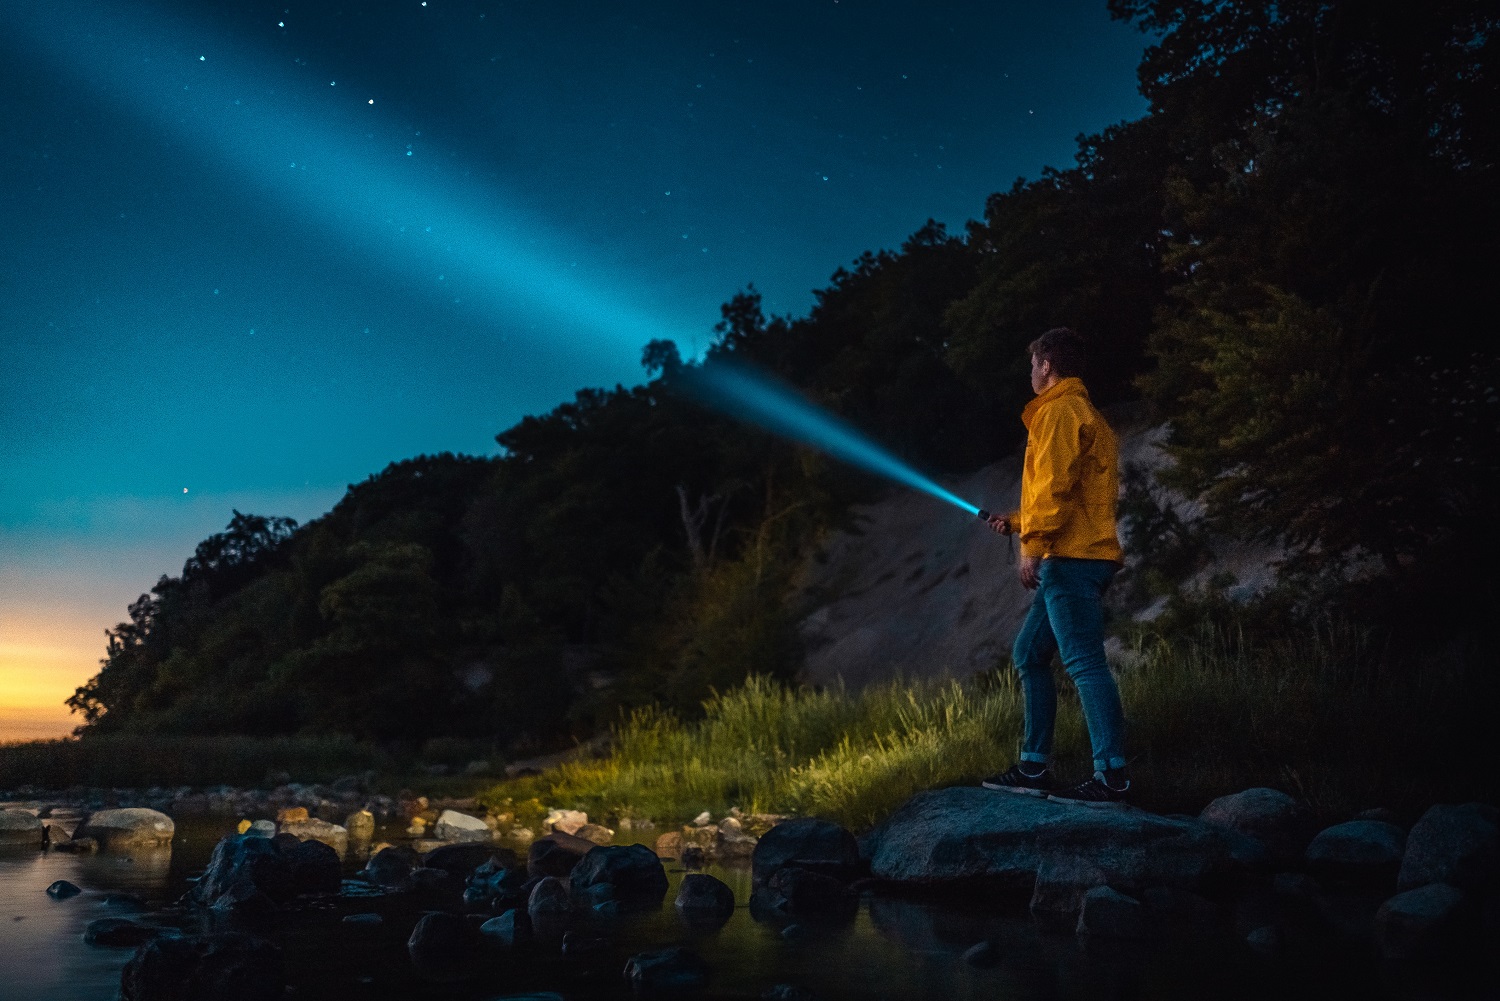 An in-depth review of the best maglite flashlights available in 2018.